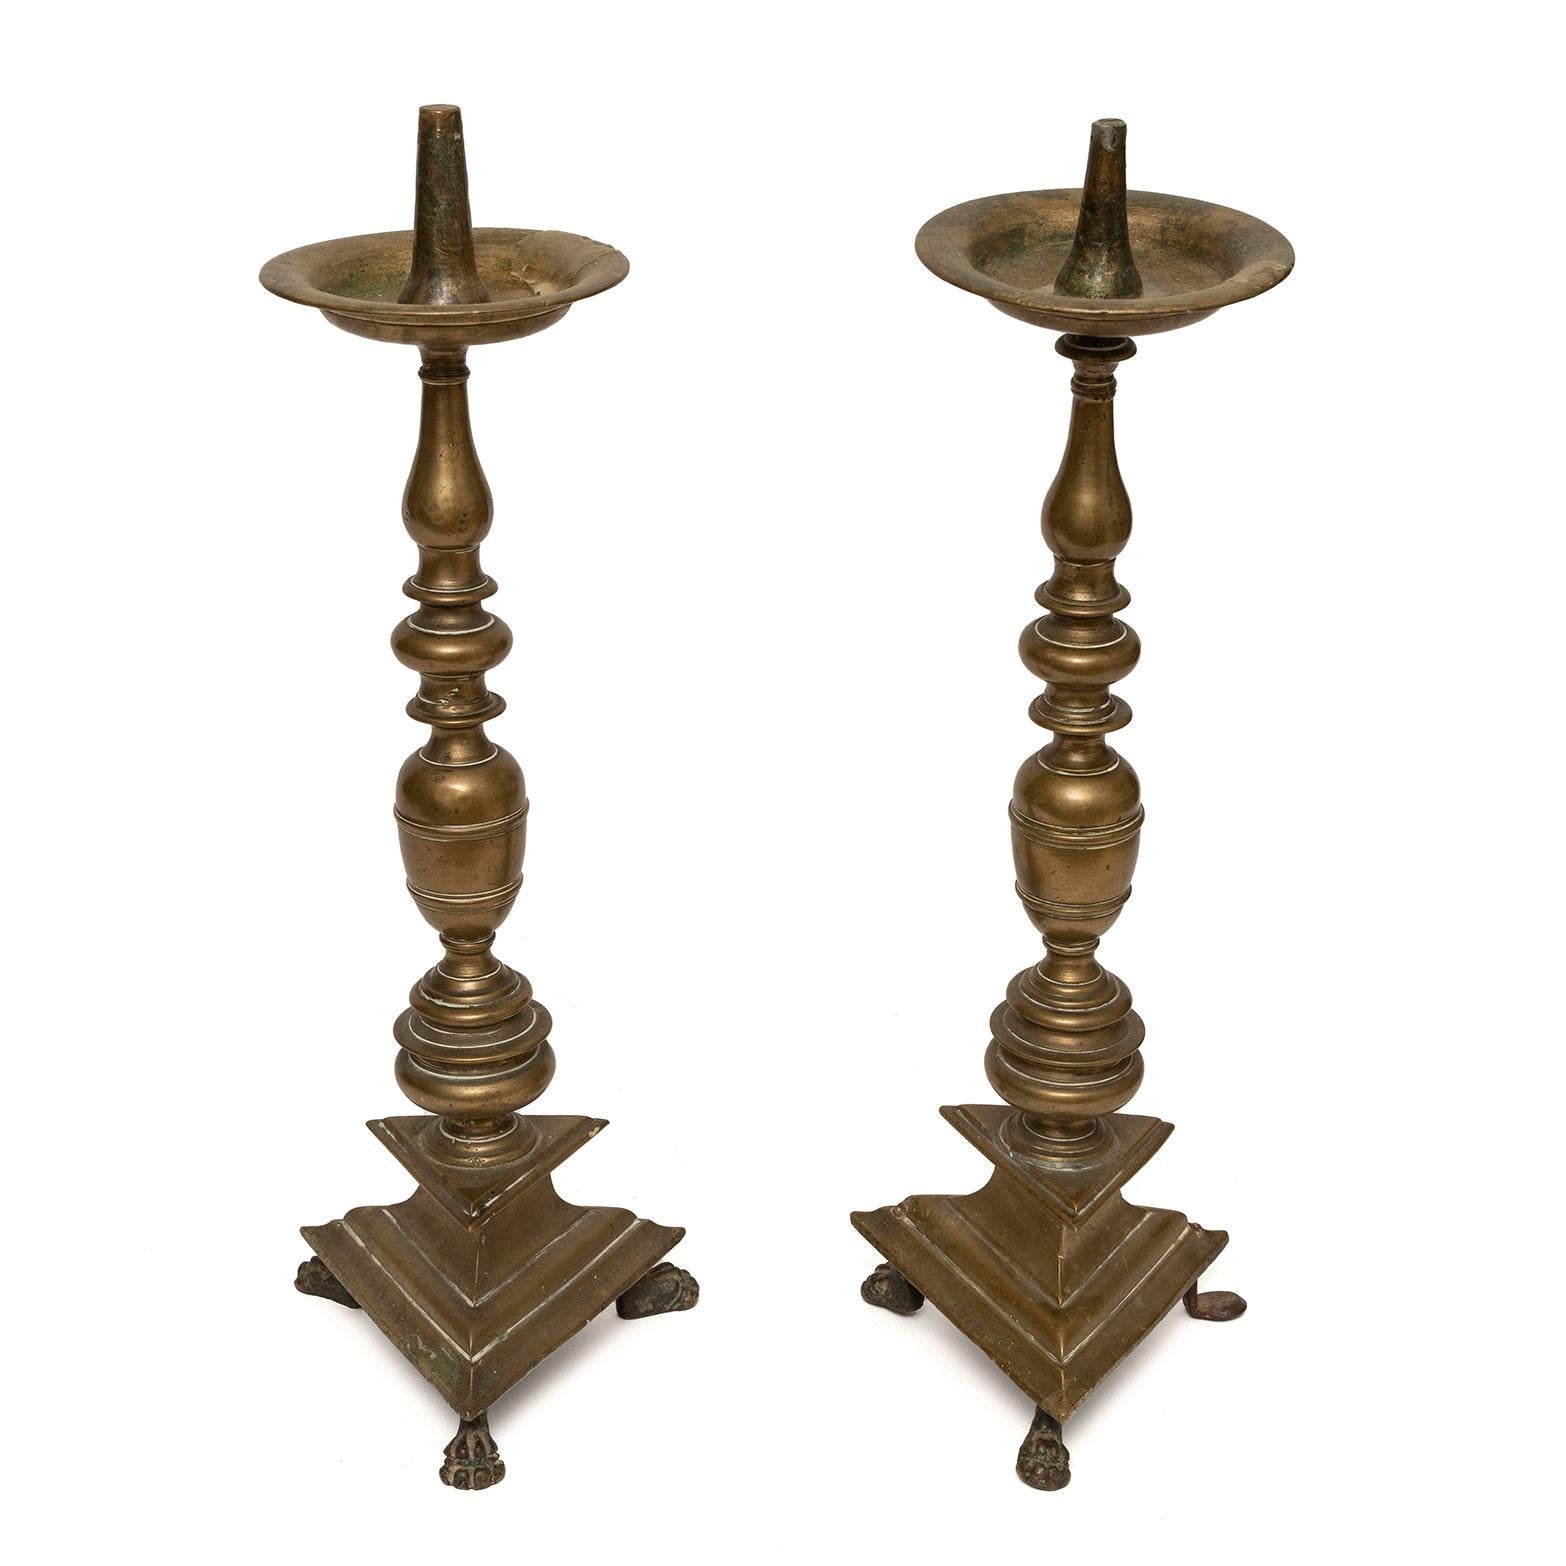 FINE, PAIR OF LATE 17TH CENTURY, FLEMISH, BRASS CANDLESTICKS WITH PRICKETS 
- Cast with a variety of turnings and shapes to create a striking aesthetic and enhance the reflection of candlelight 
- Characteristic form of the period 
- Inject